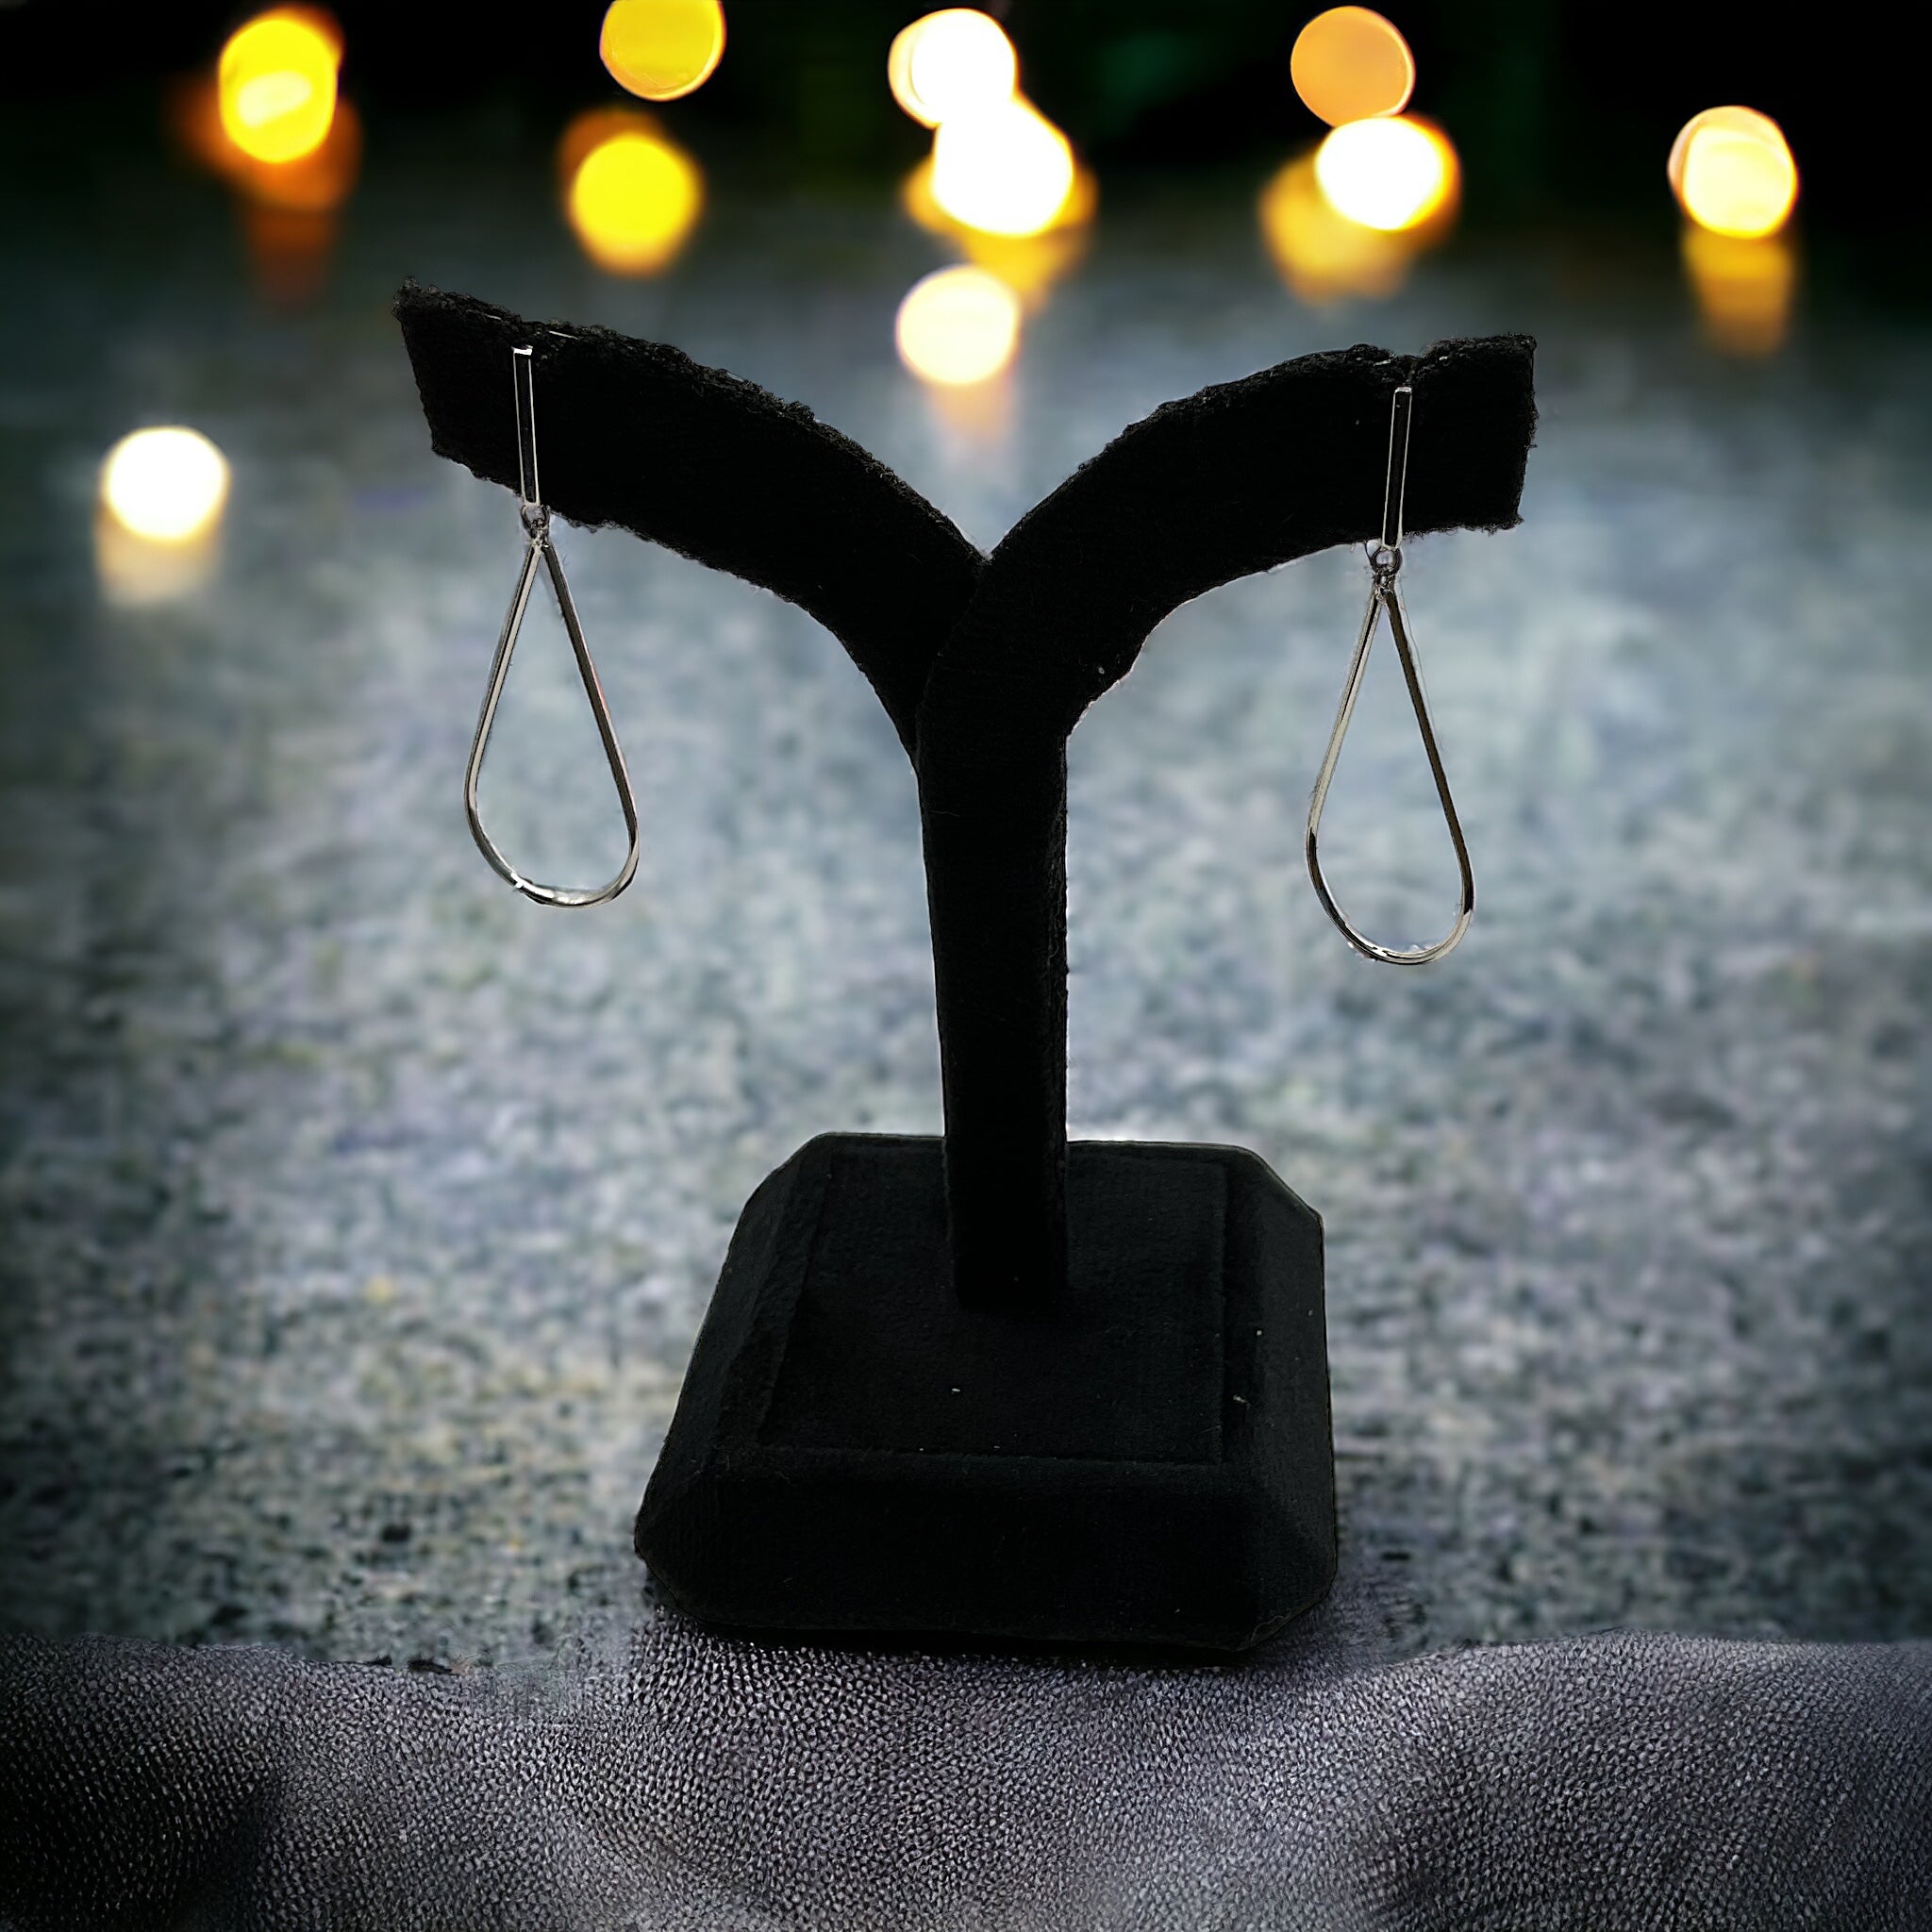 a pair of earrings on a stand on a table